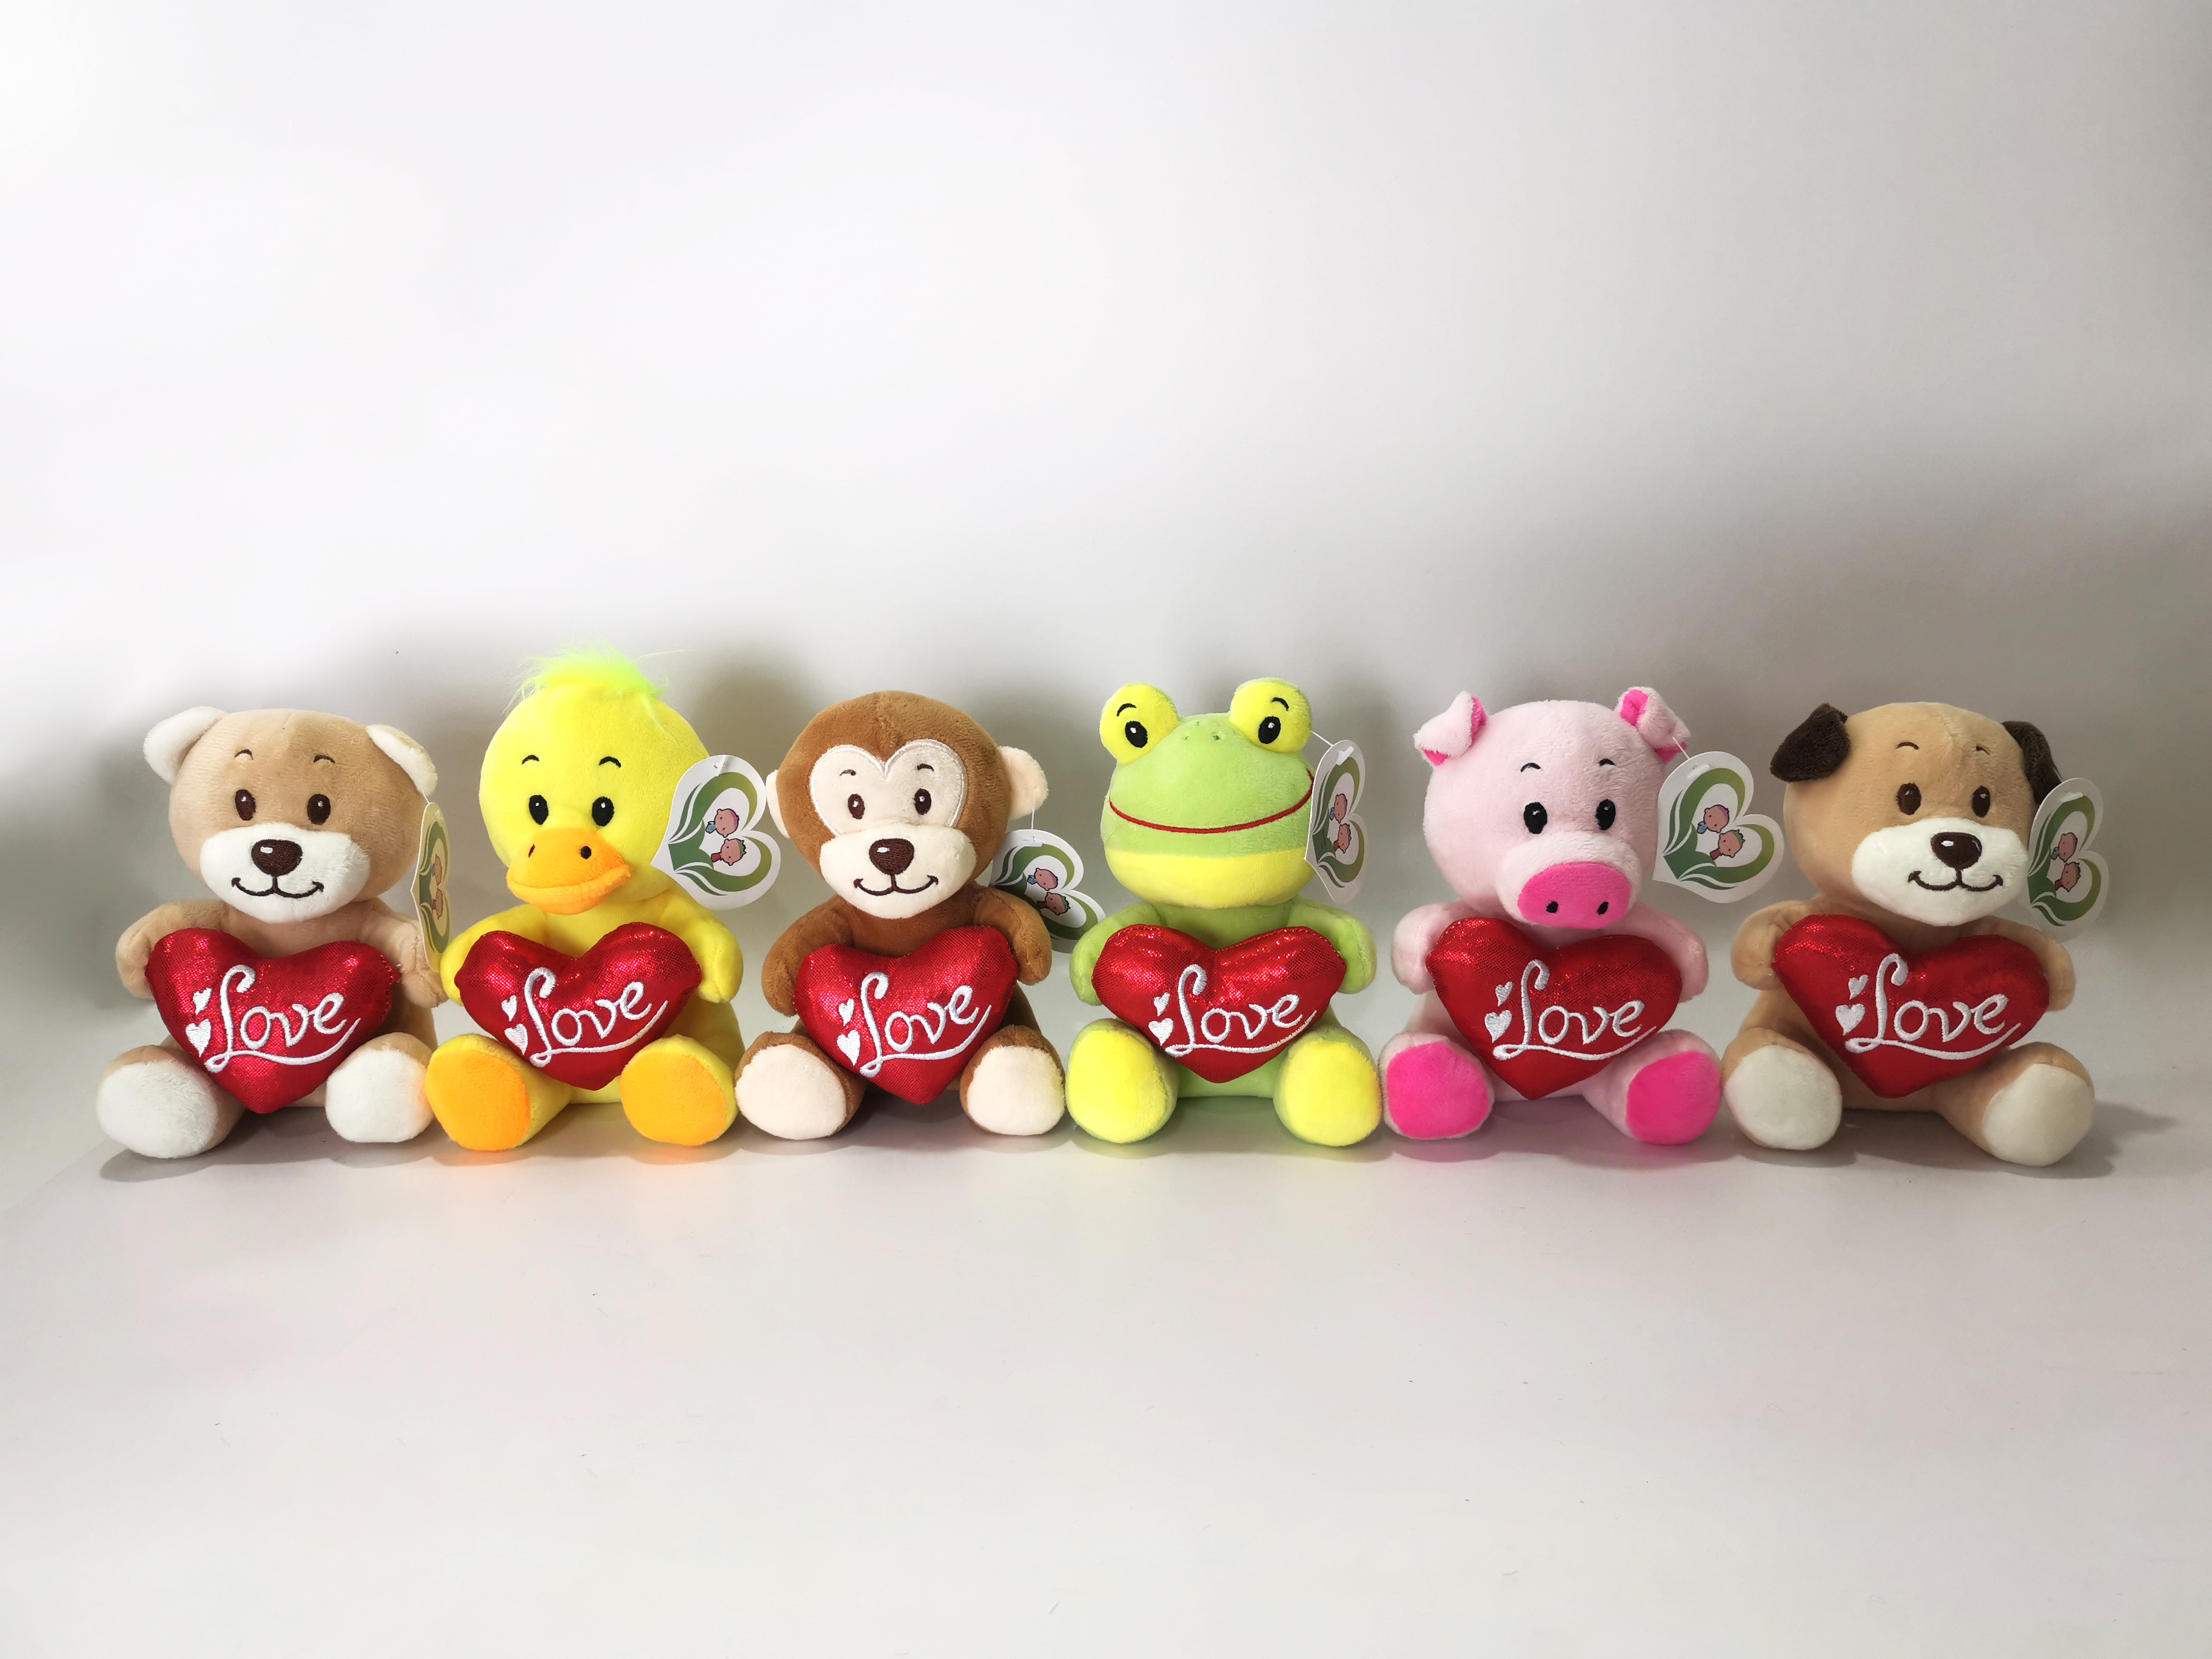 2019 Valentine Plush Toys: 6asst. cute animals with hearts